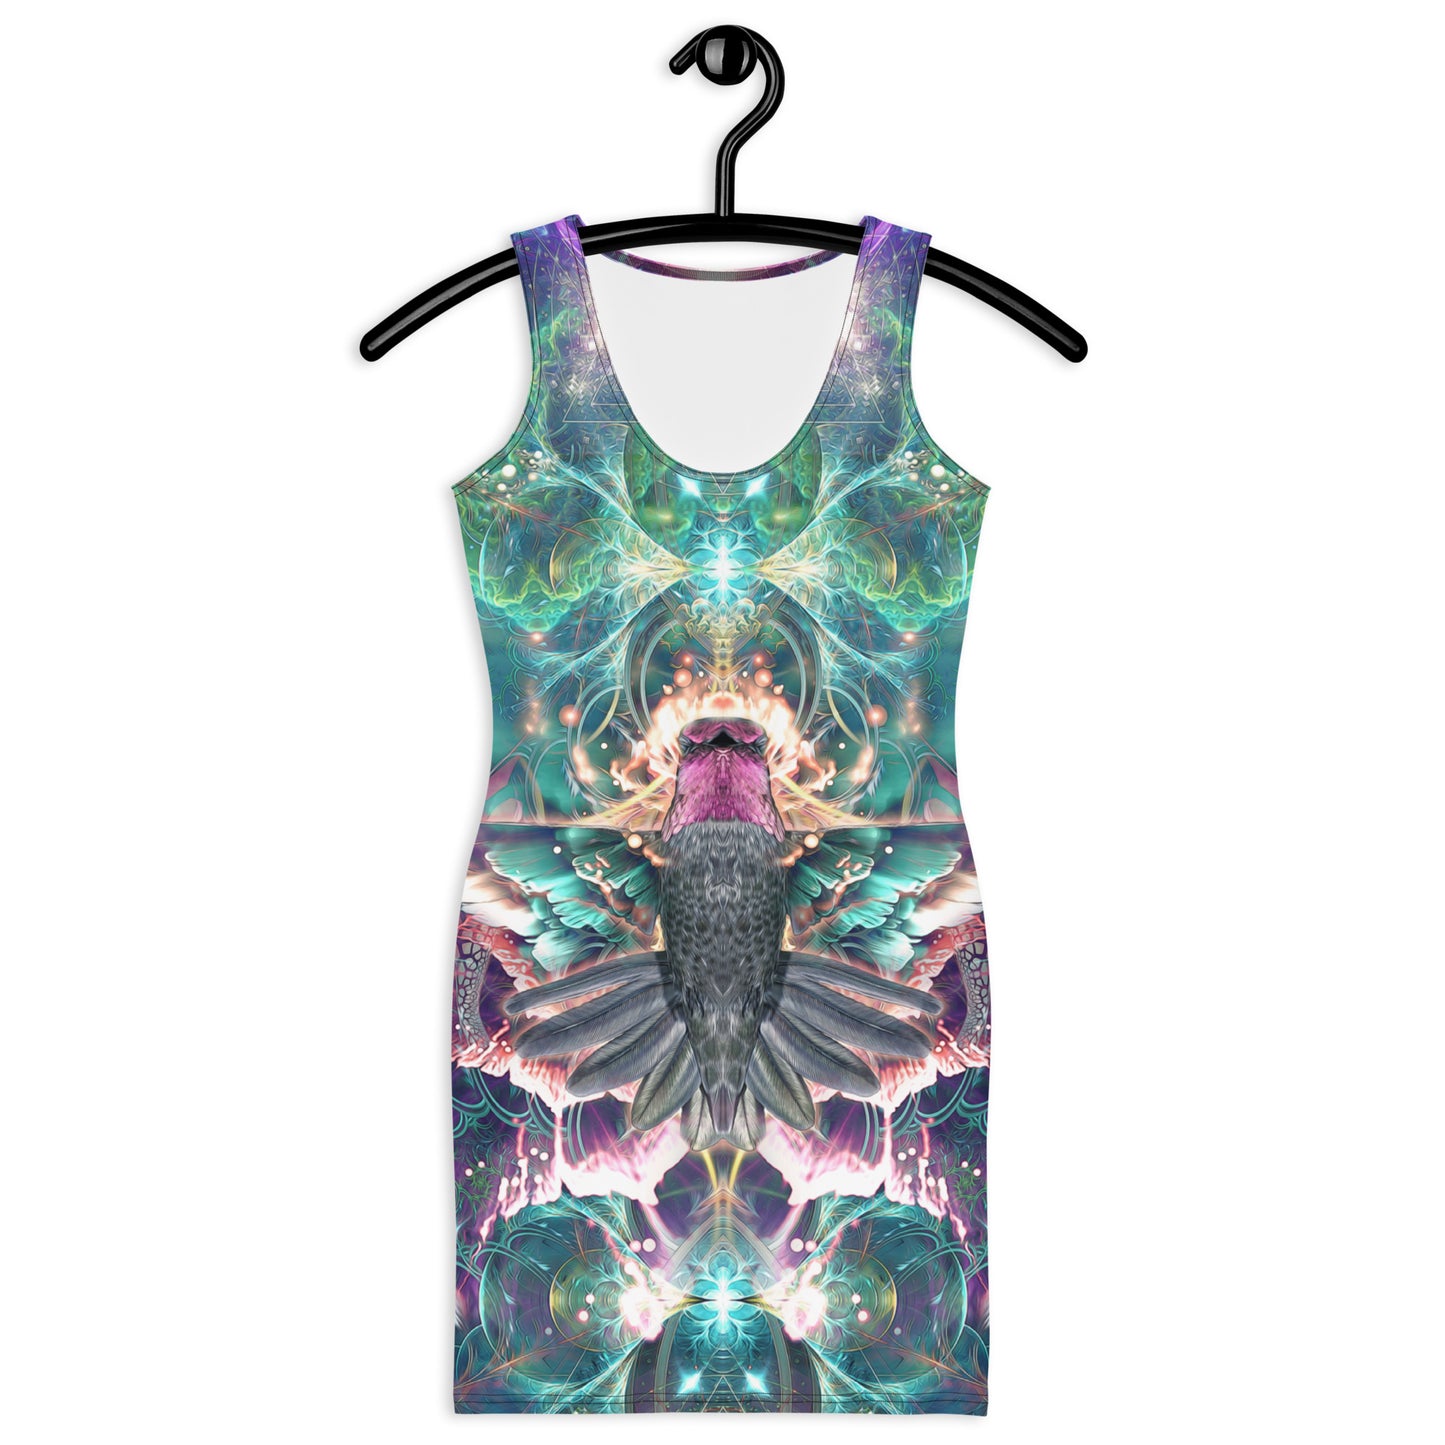 "Nectar" Bodycon FITTED DRESS